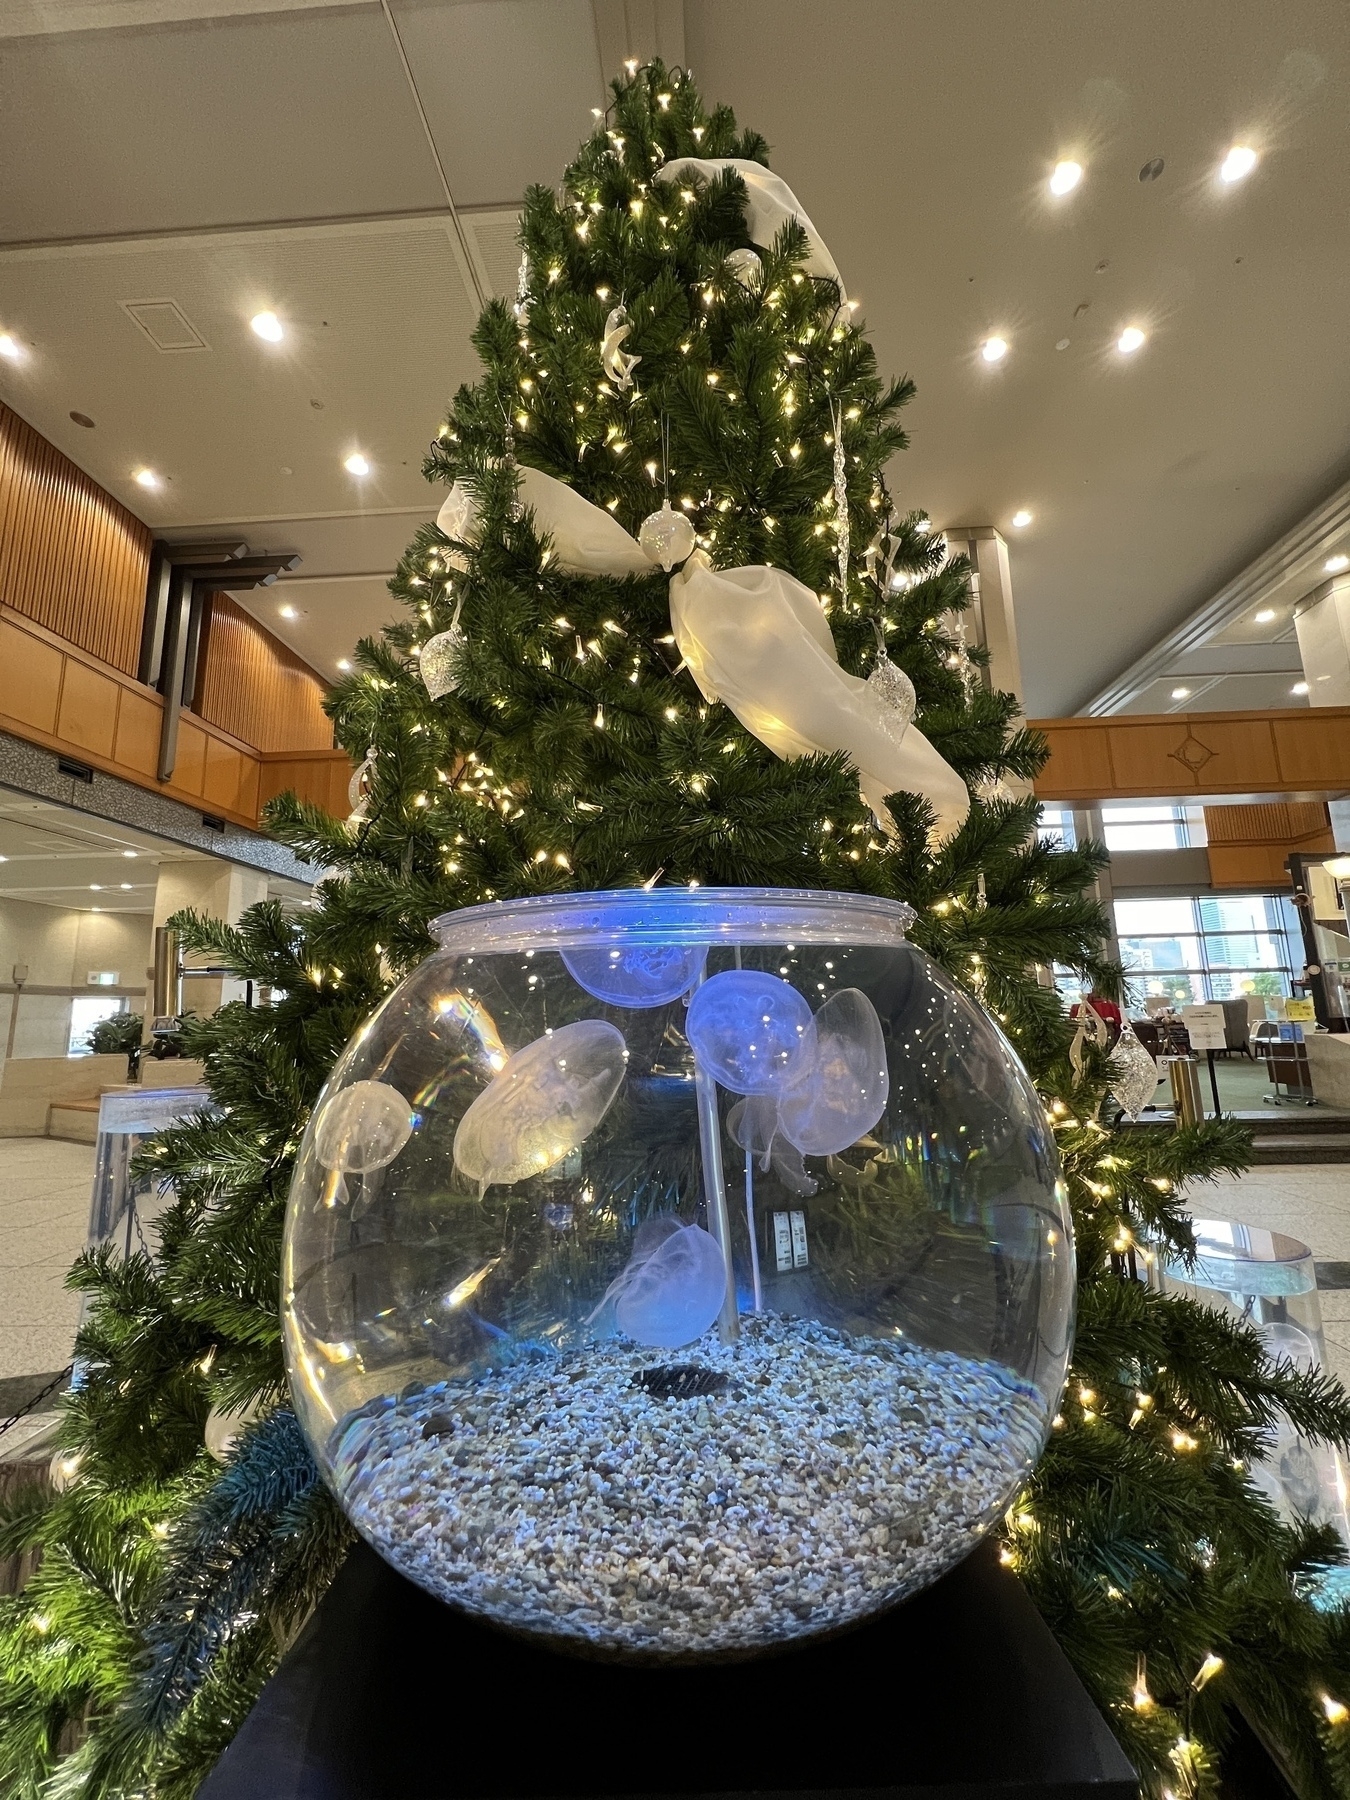 A large round bowl aquarium filled with Jellyfish on display in front of an Xmas tree in the lobby of a large office park